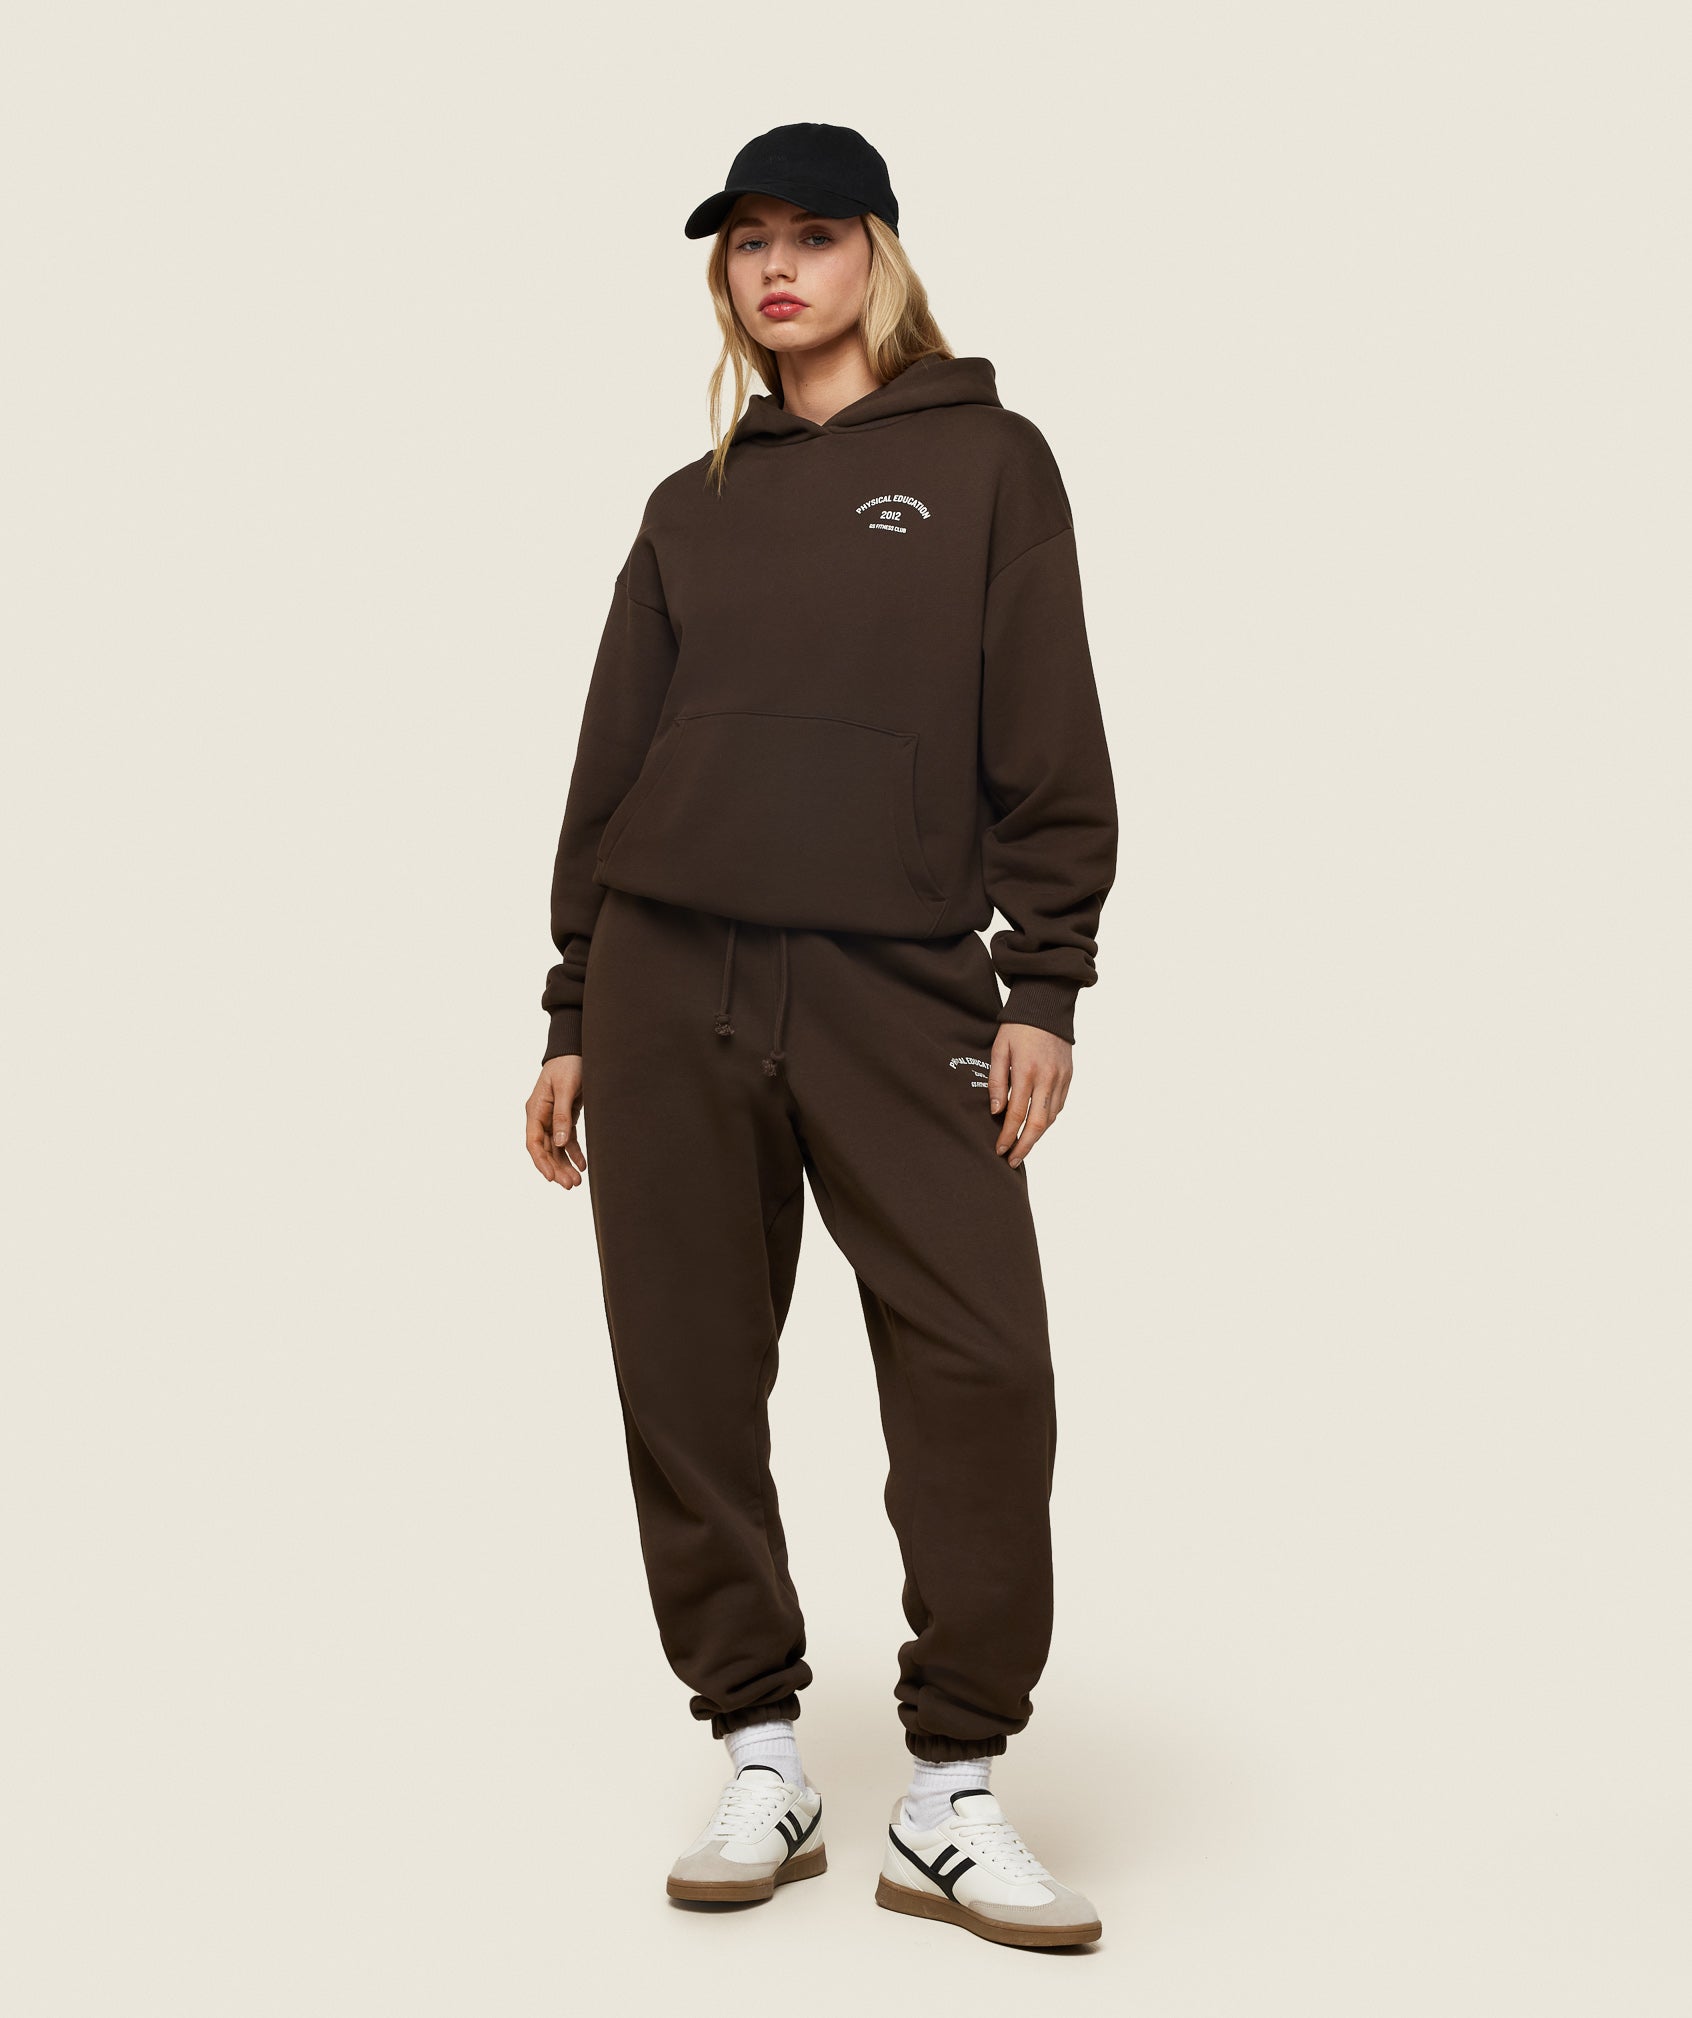 Phys Ed Graphic Hoodie in Archive Brown - view 3